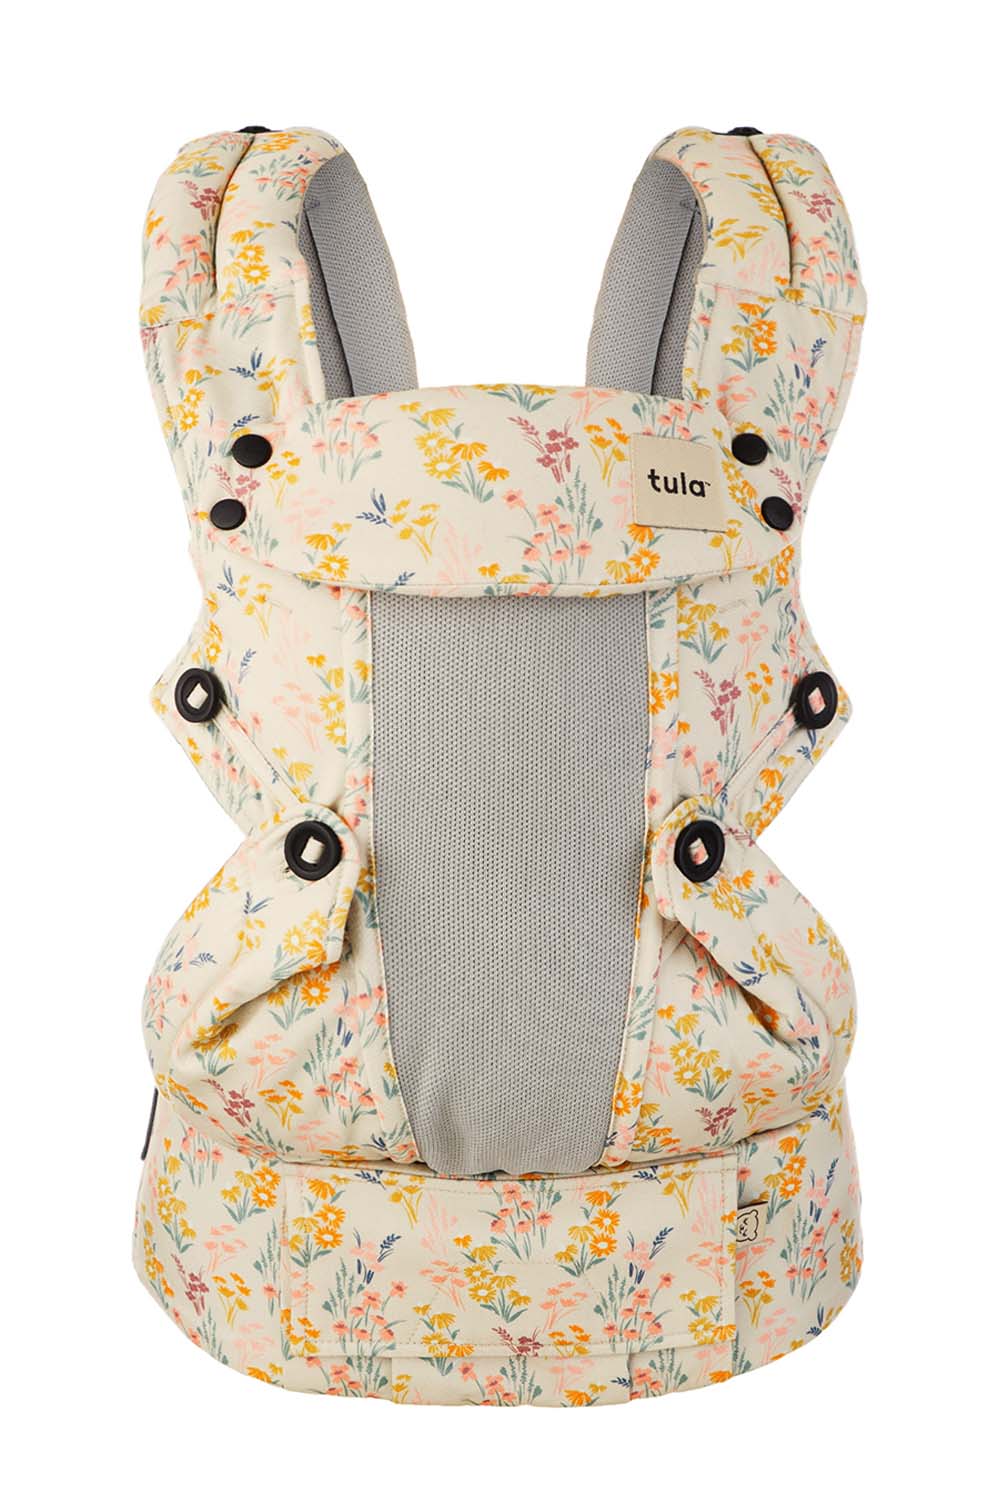 How Long Can You Use a Baby Carrier